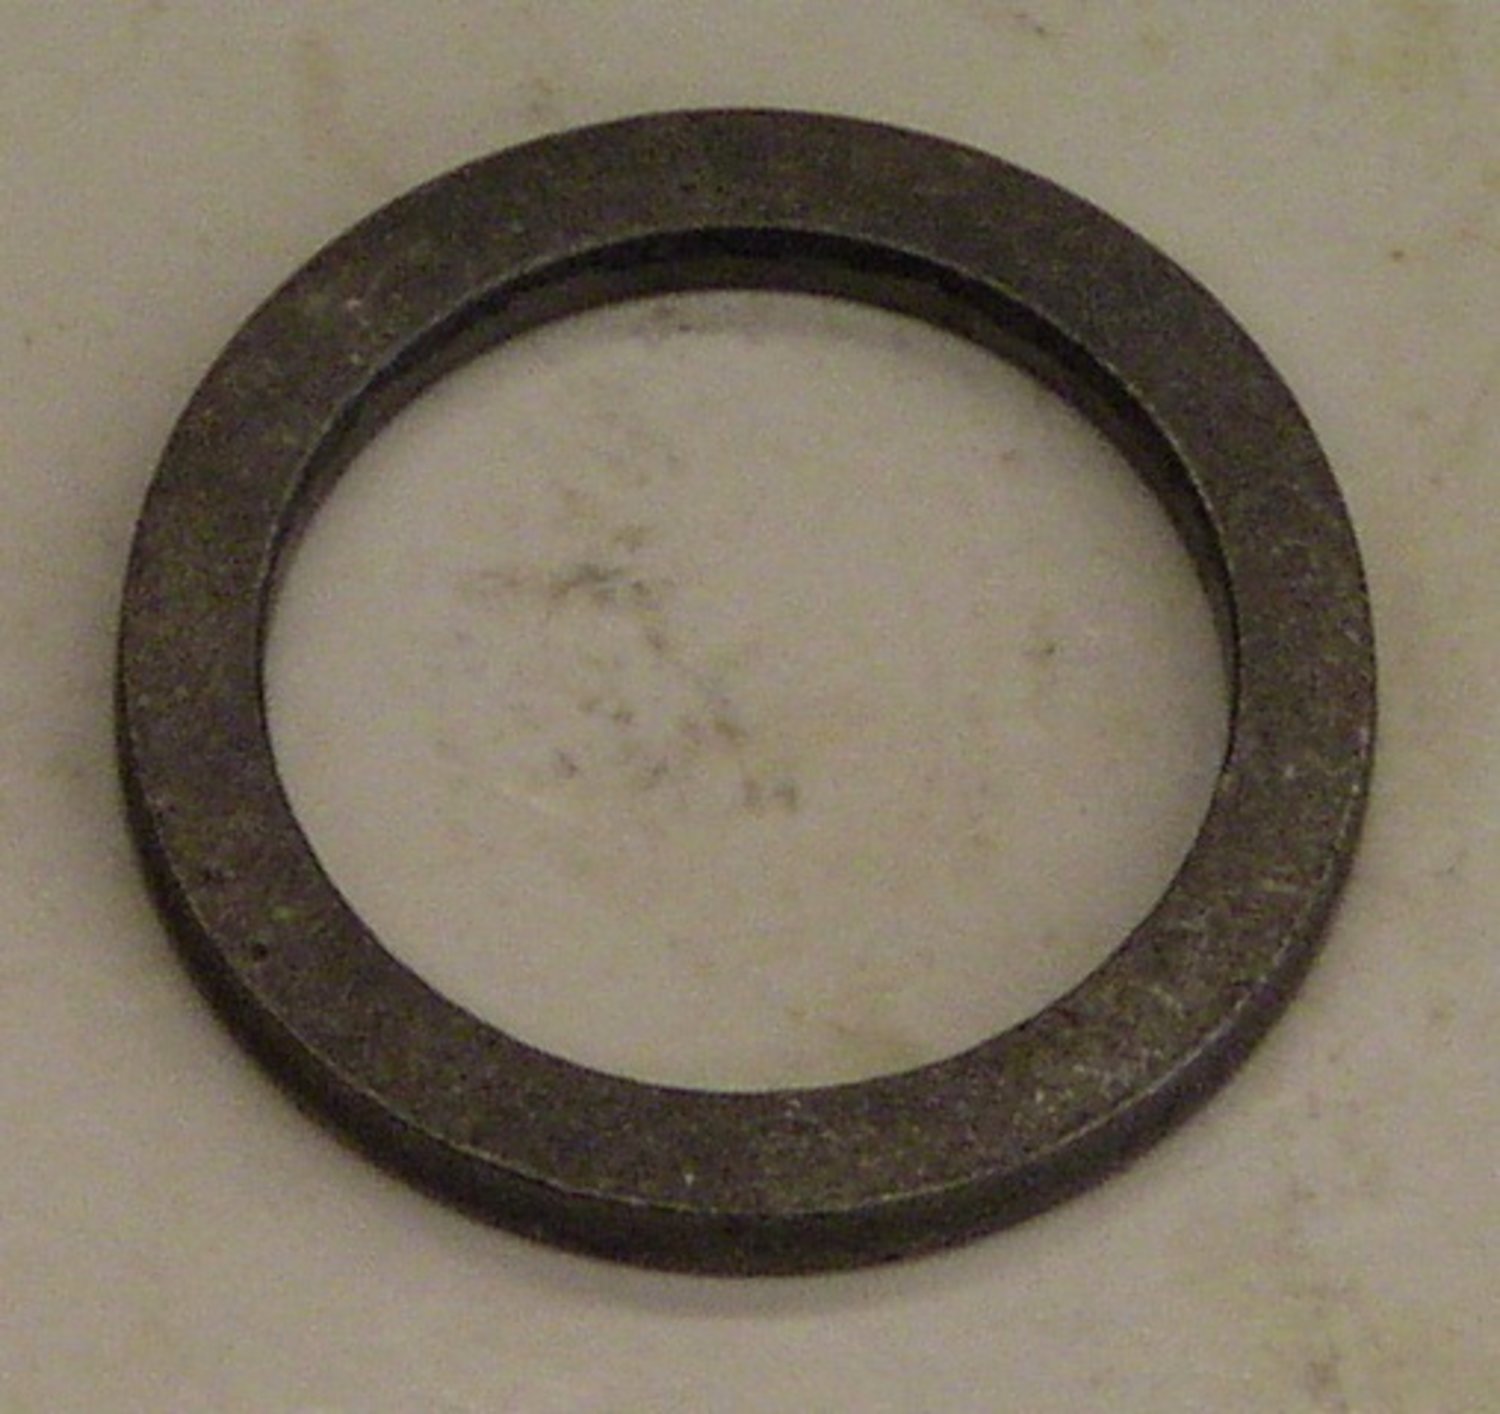 7010360861 - 3M Angle Head Spacer 06652